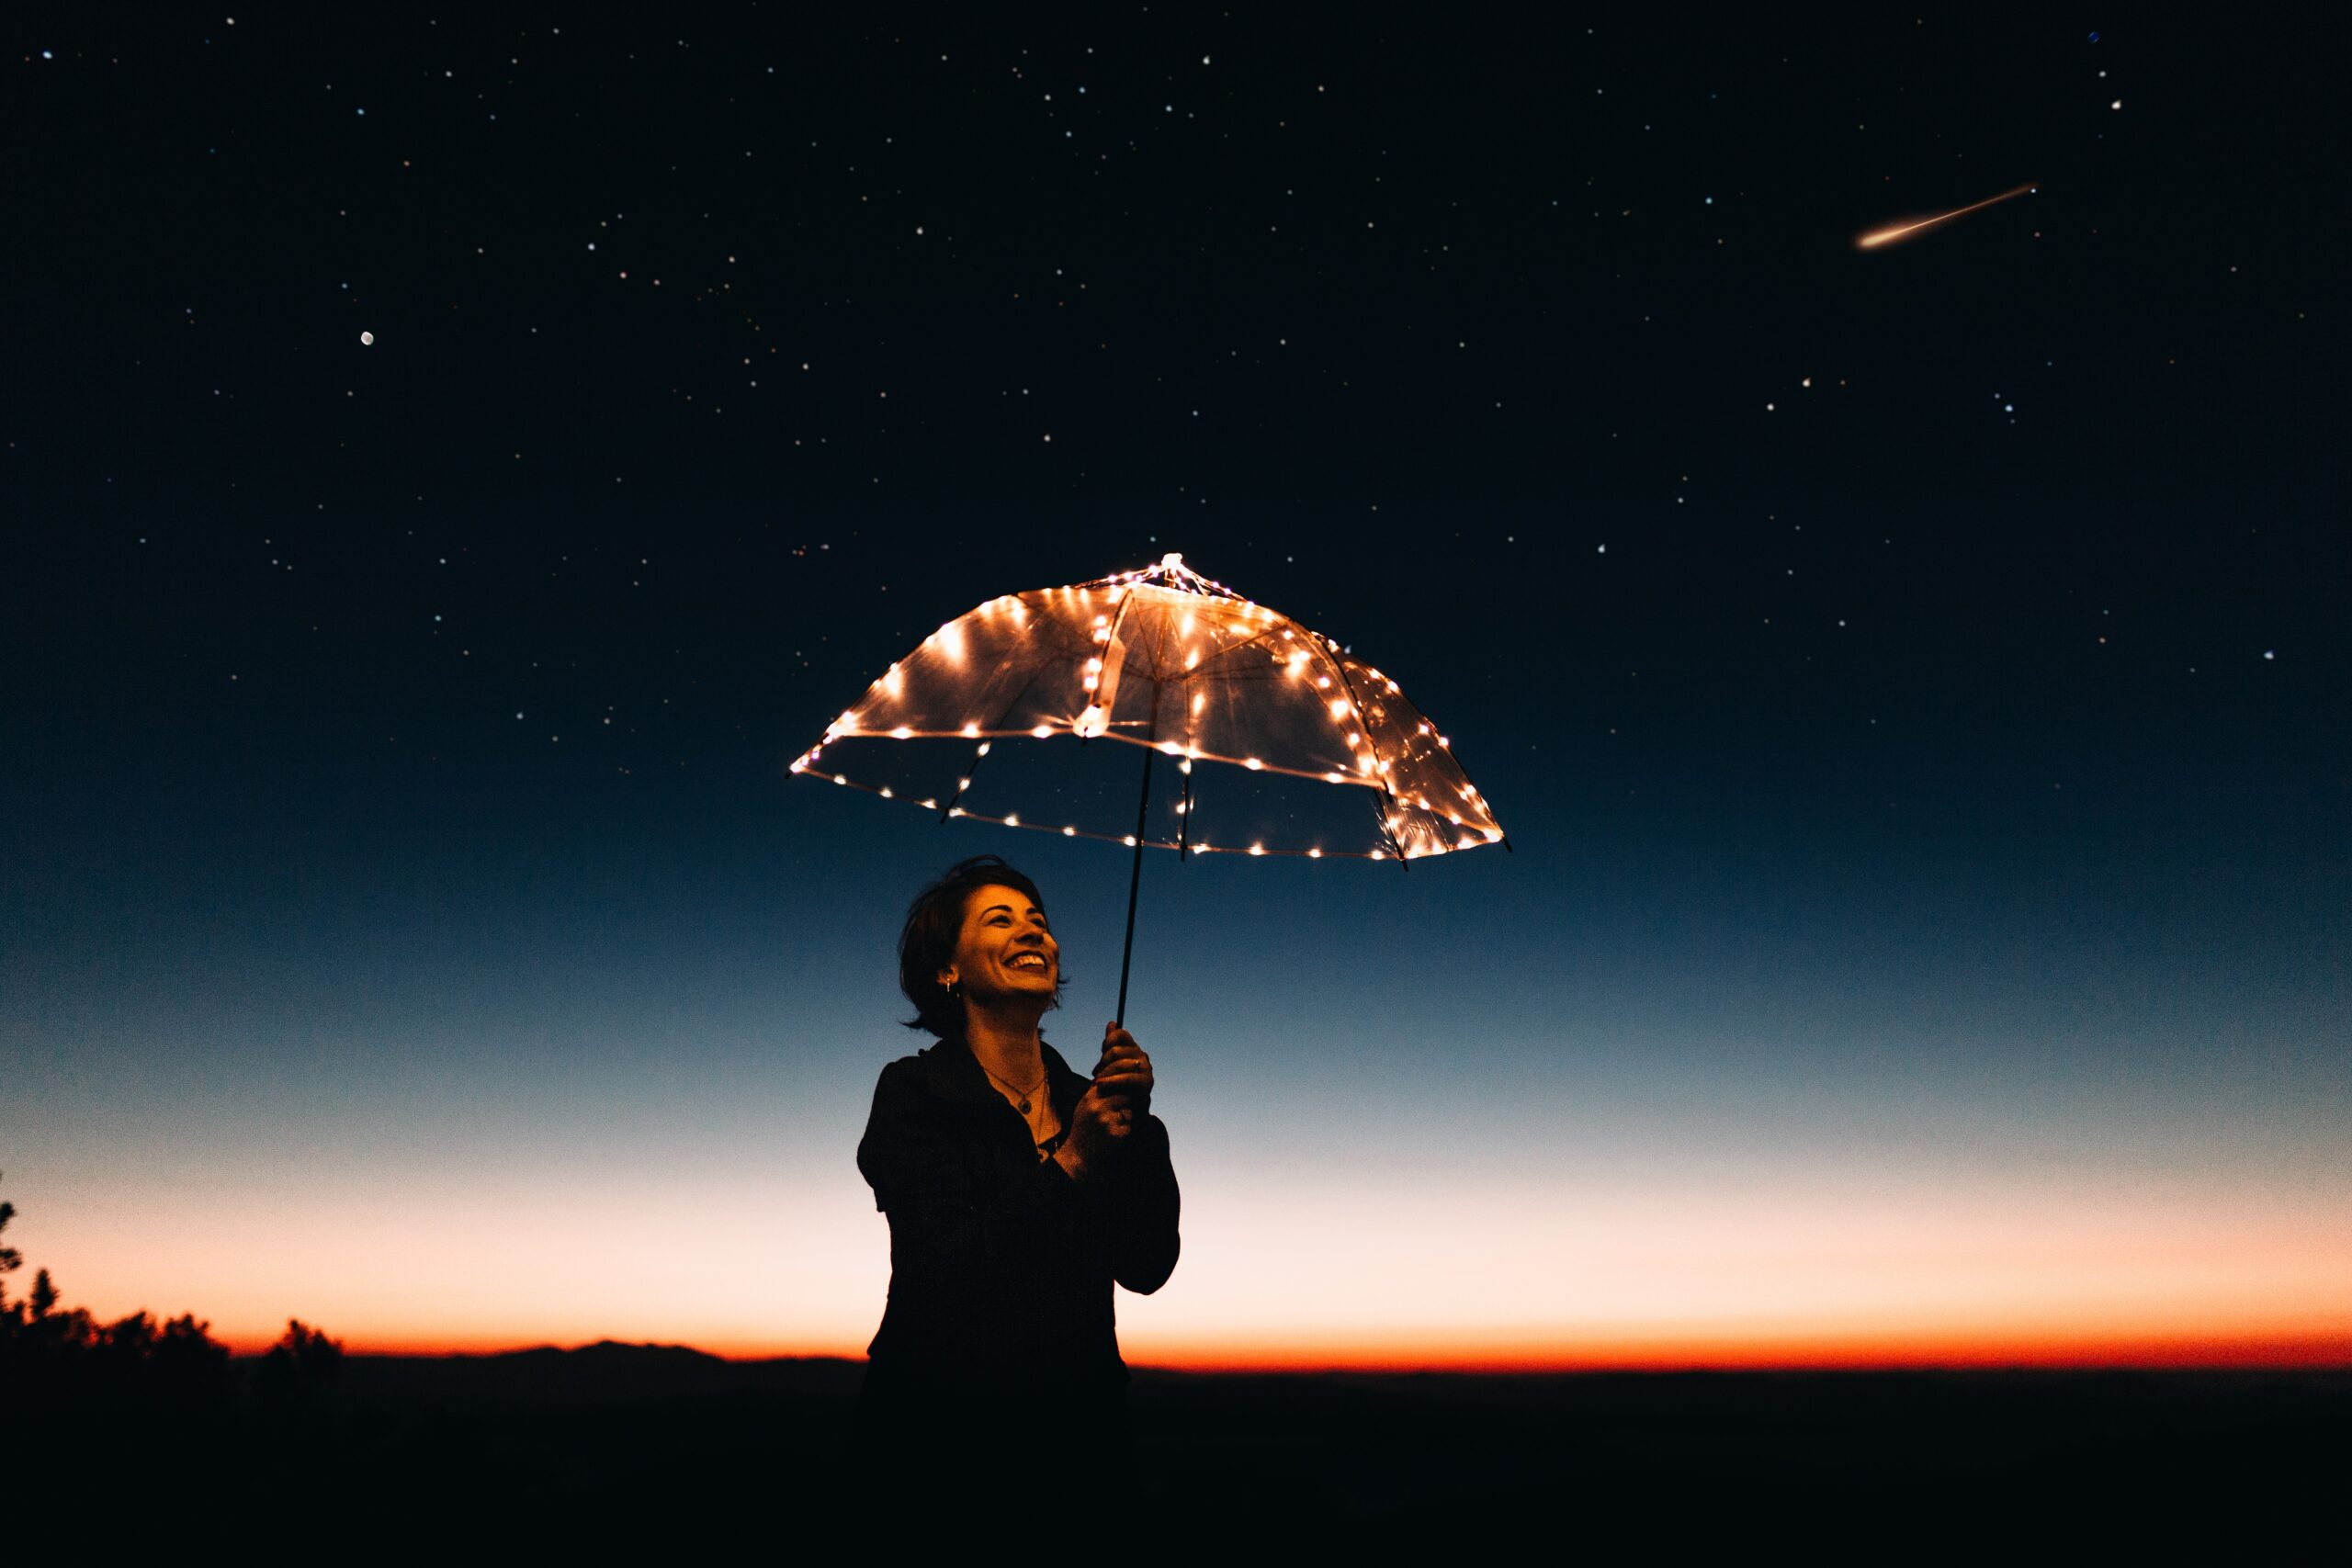 Woman with an umbrella made of lights standing against a sunset.